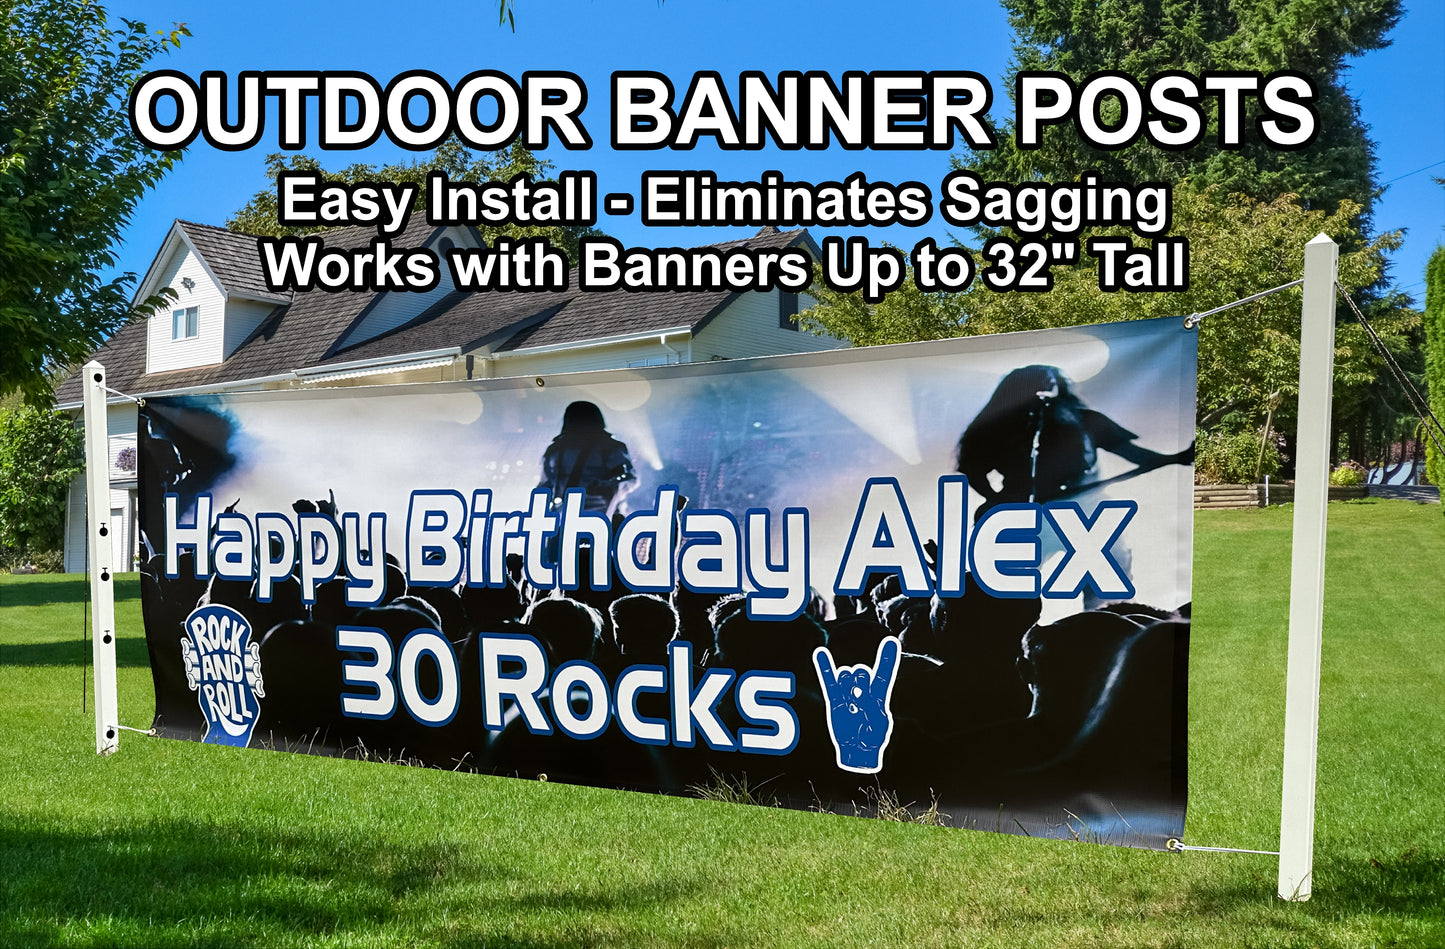 HAPPY BIRTHDAY BANNER, 4 Sizes, Custom Personalized Vinyl Indoor/Outdoor Party Celebration Decoration, Personalize Name and Age, CB133